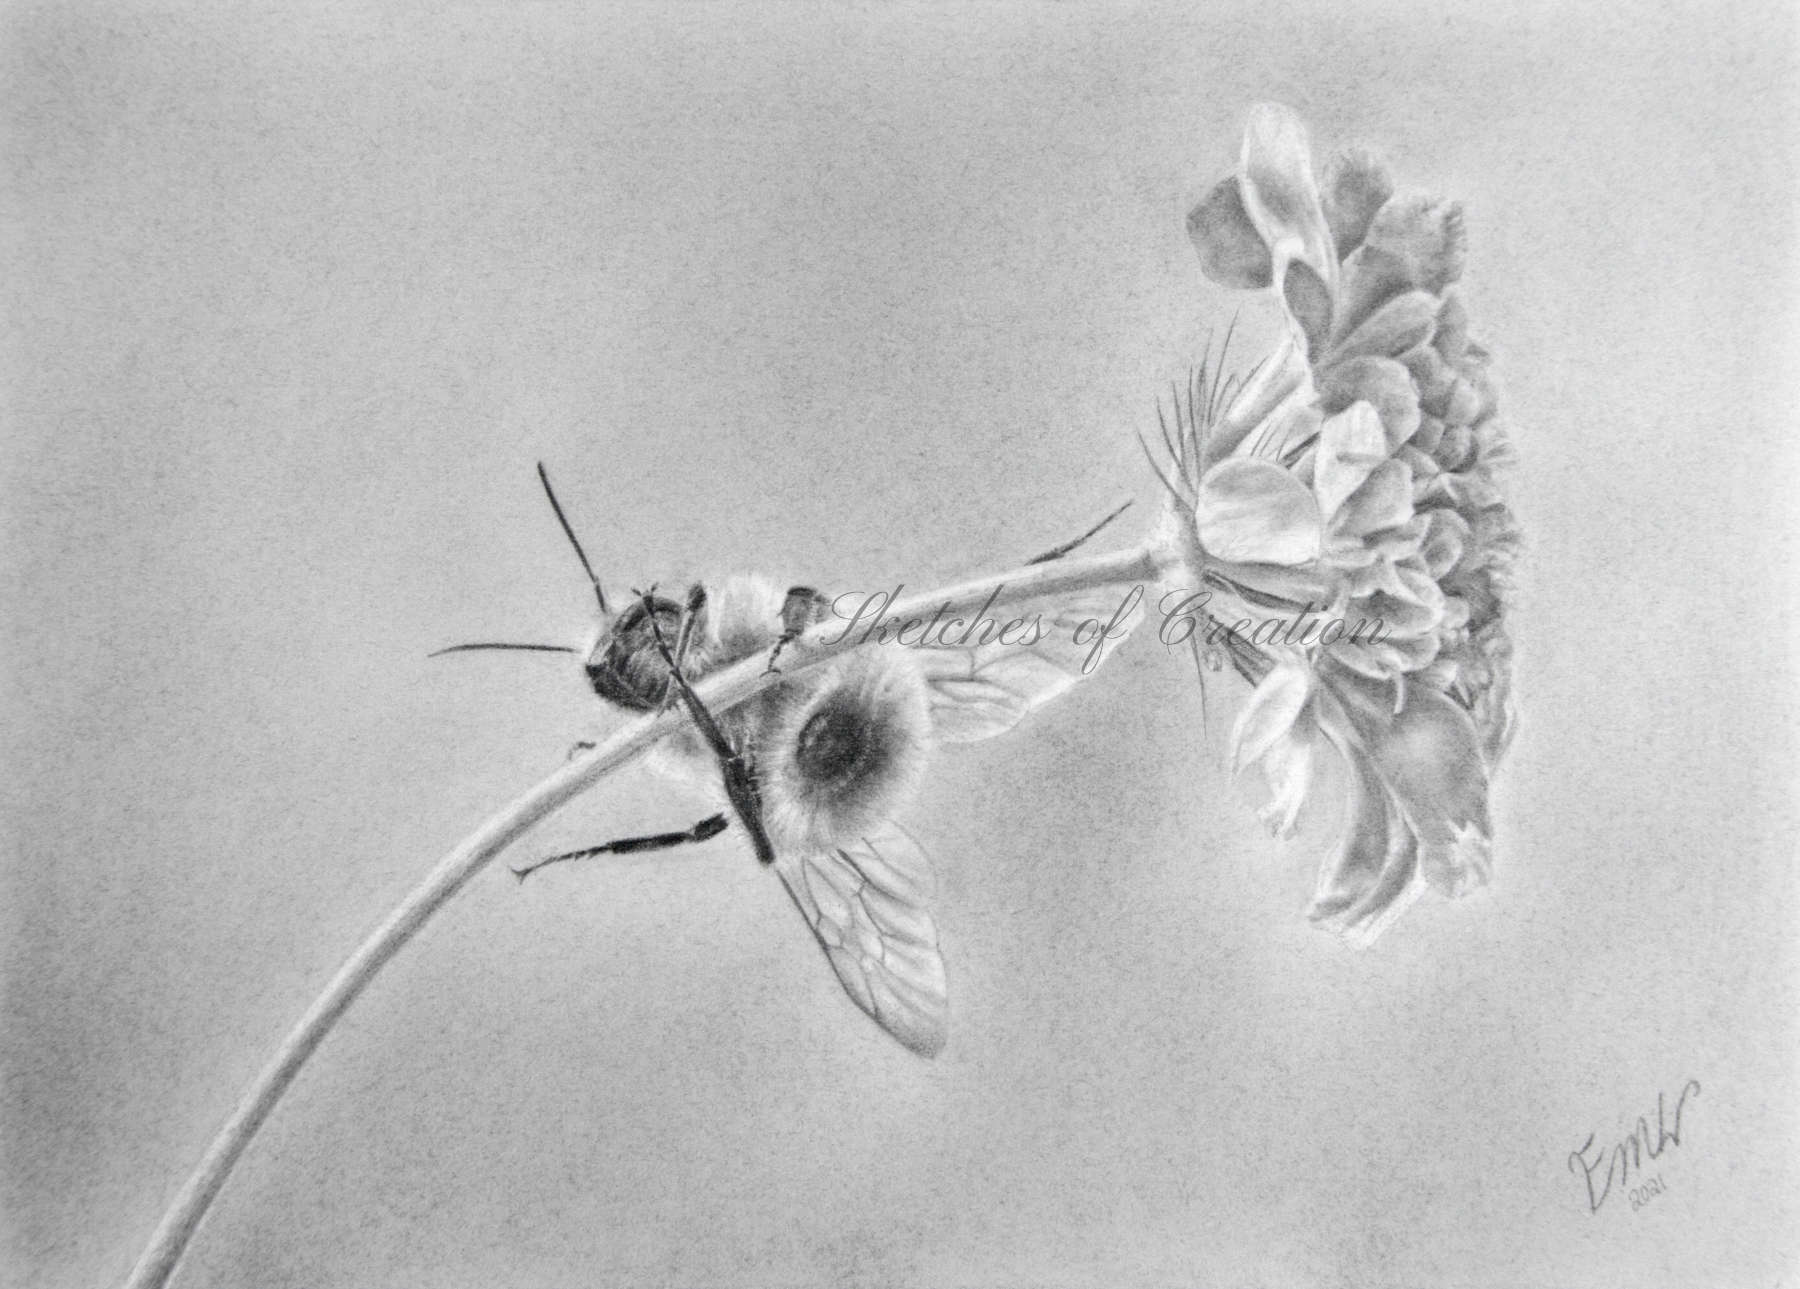 'Hang On!' a drawing of a Bumble bee climbing on a flower stem. Completed July 2021